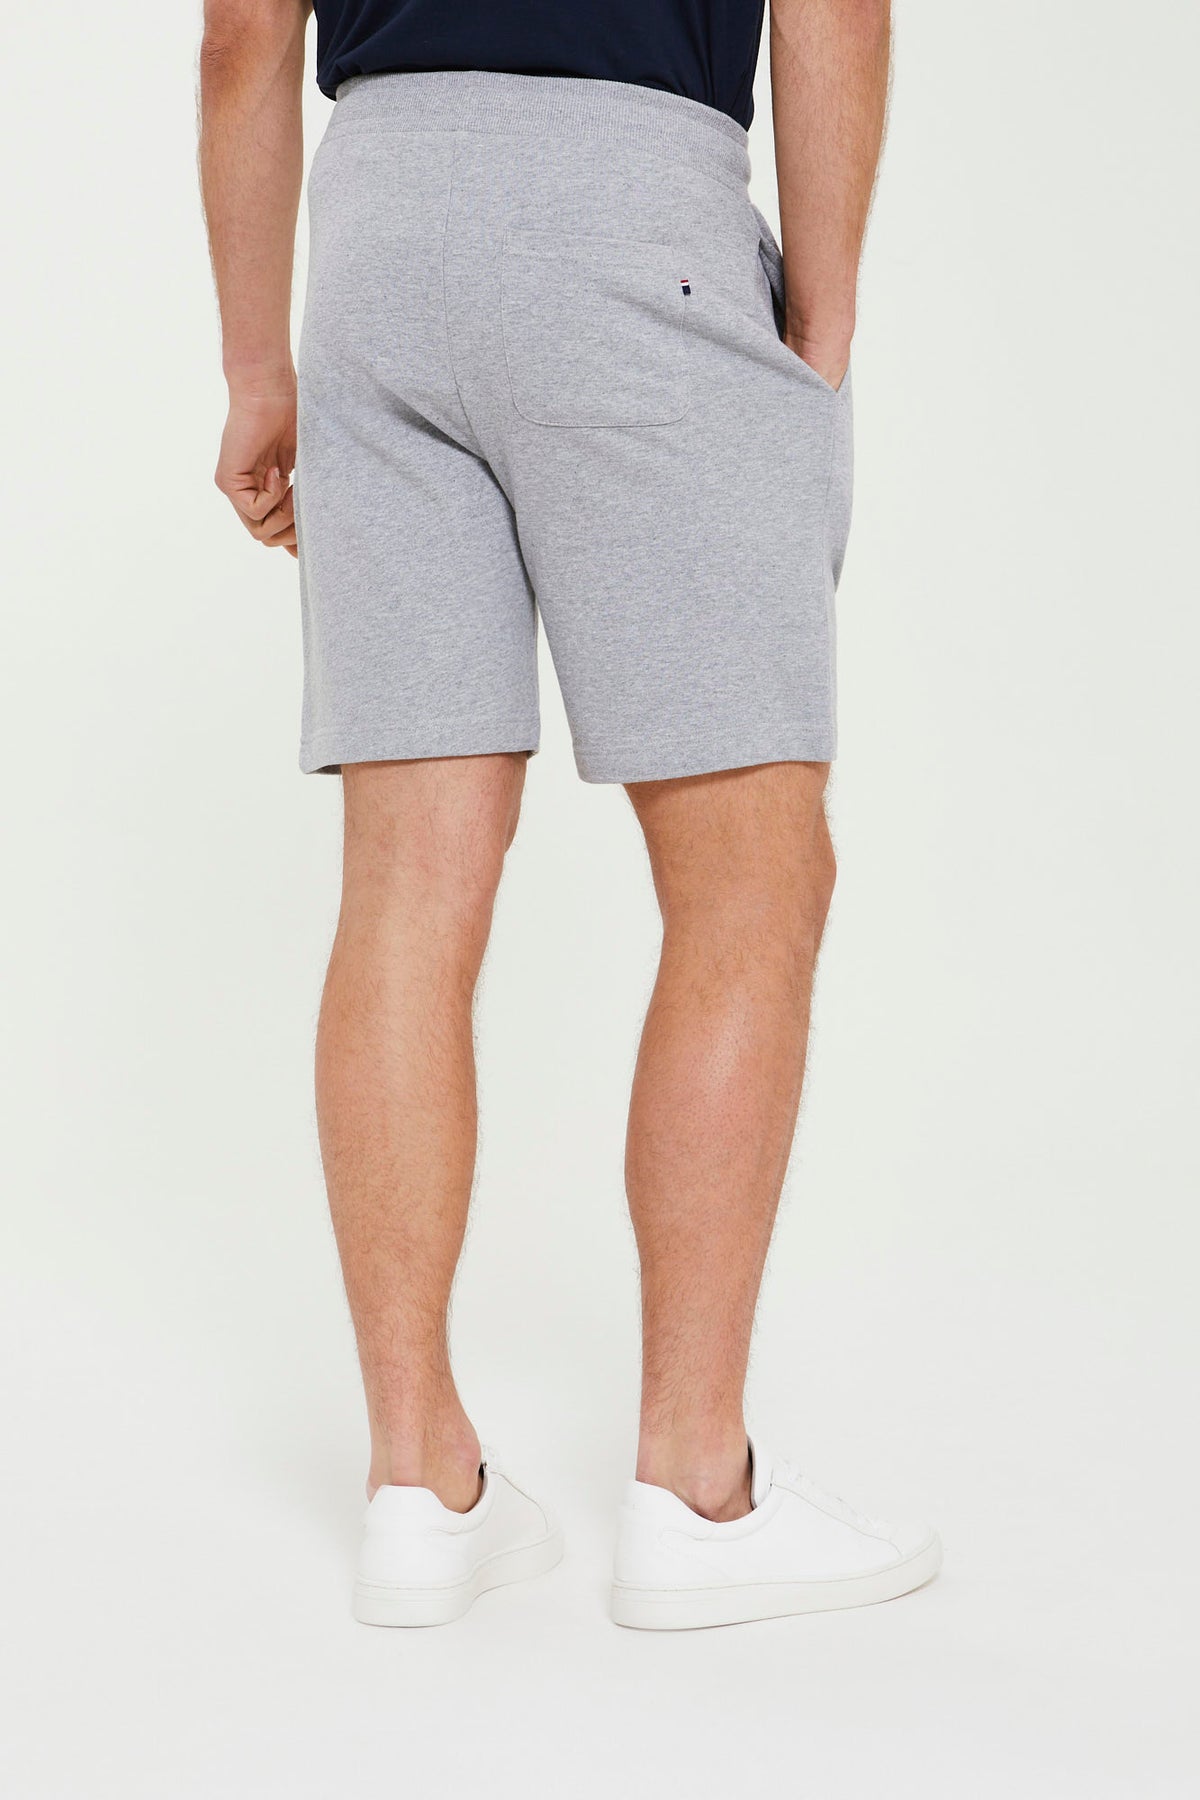 Mens Player 3 Sweat Shorts in Vintage Grey Heather